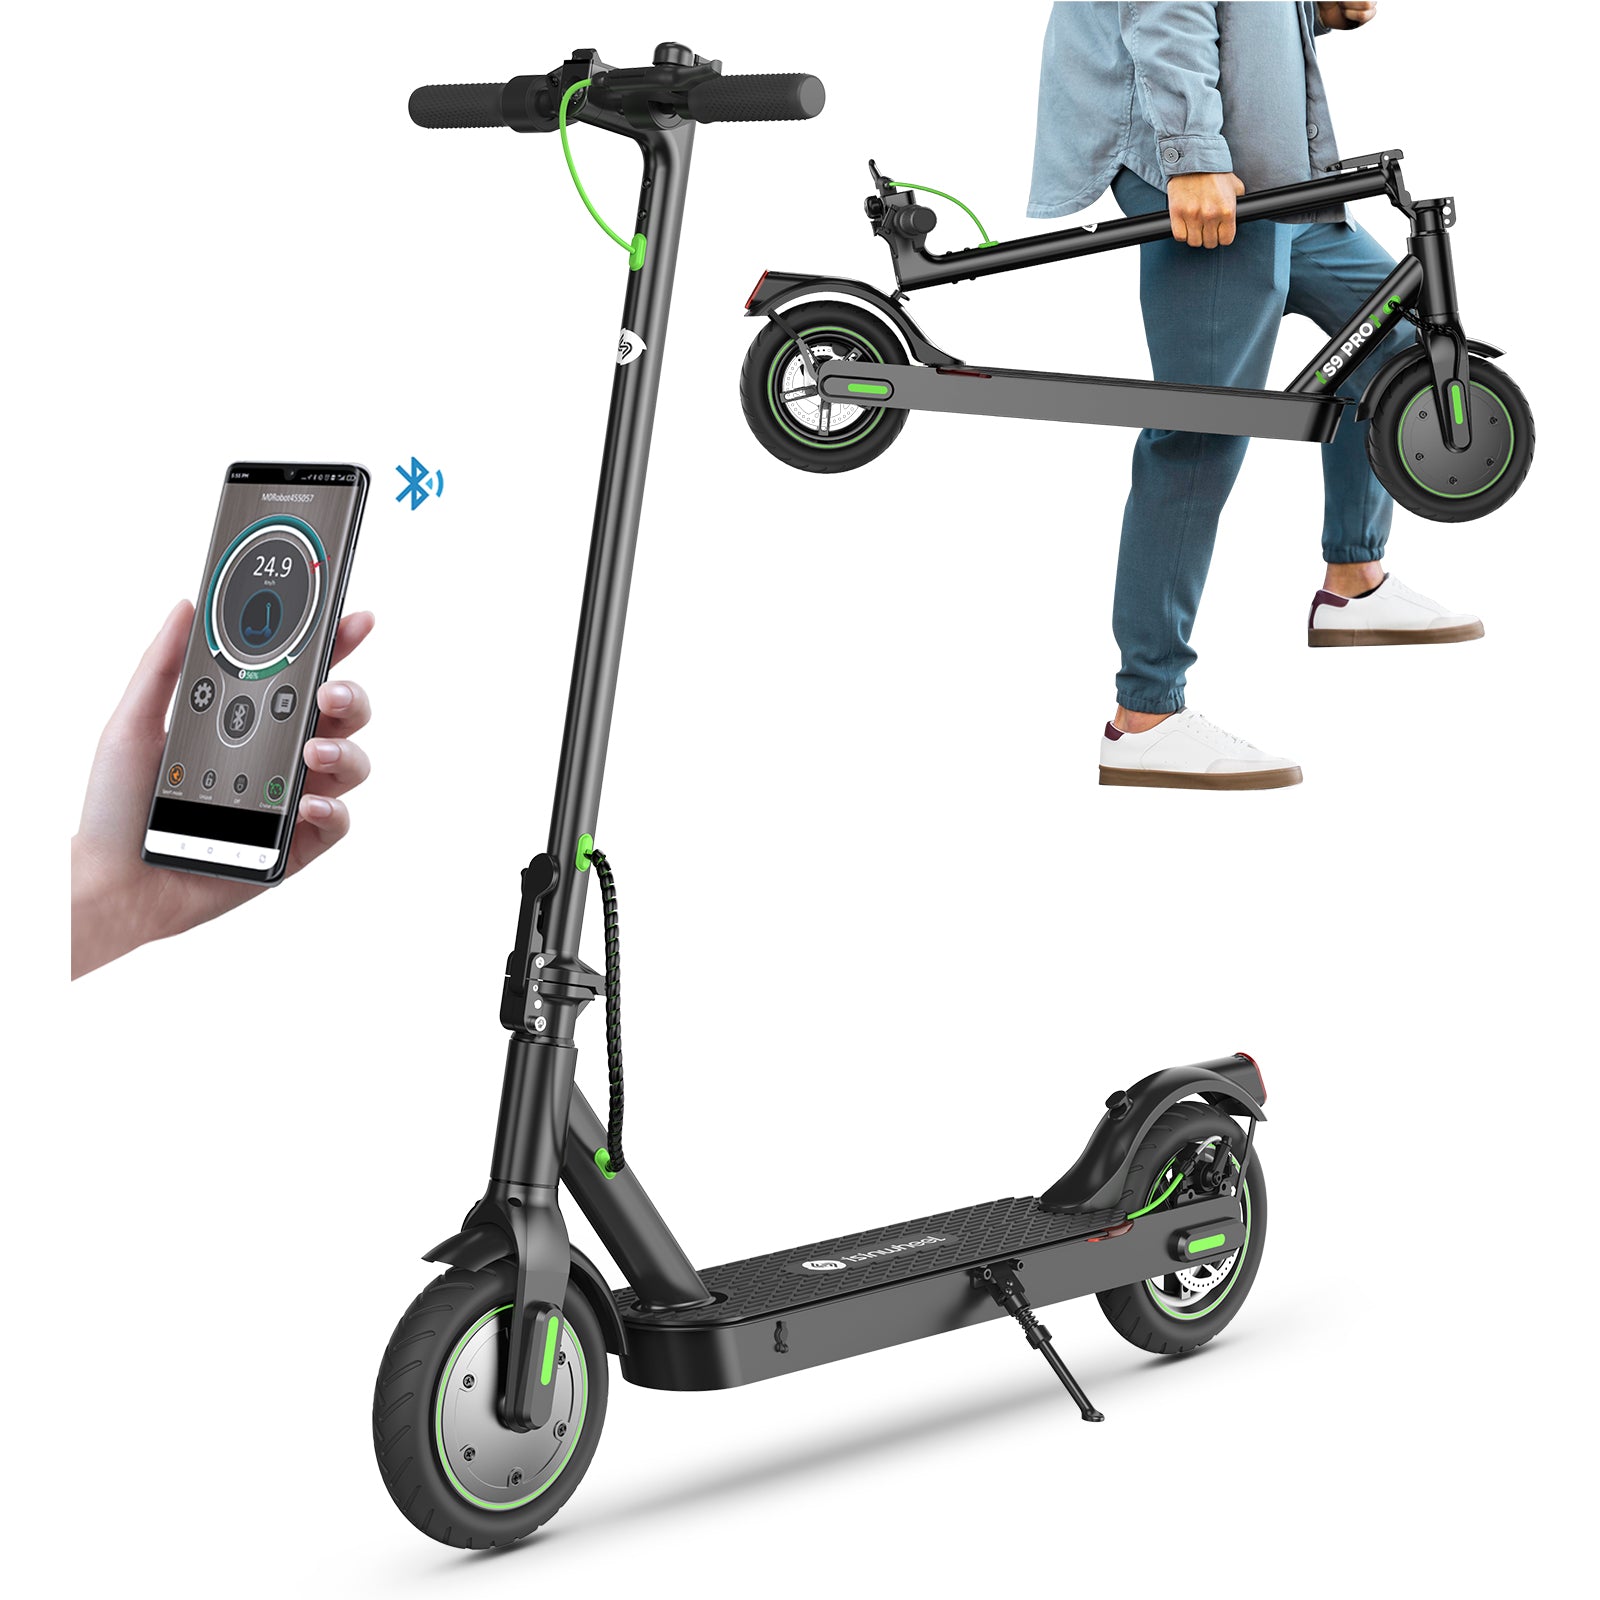 isinwheel S9 Pro Pneumatic Tire Electric Scooter 5